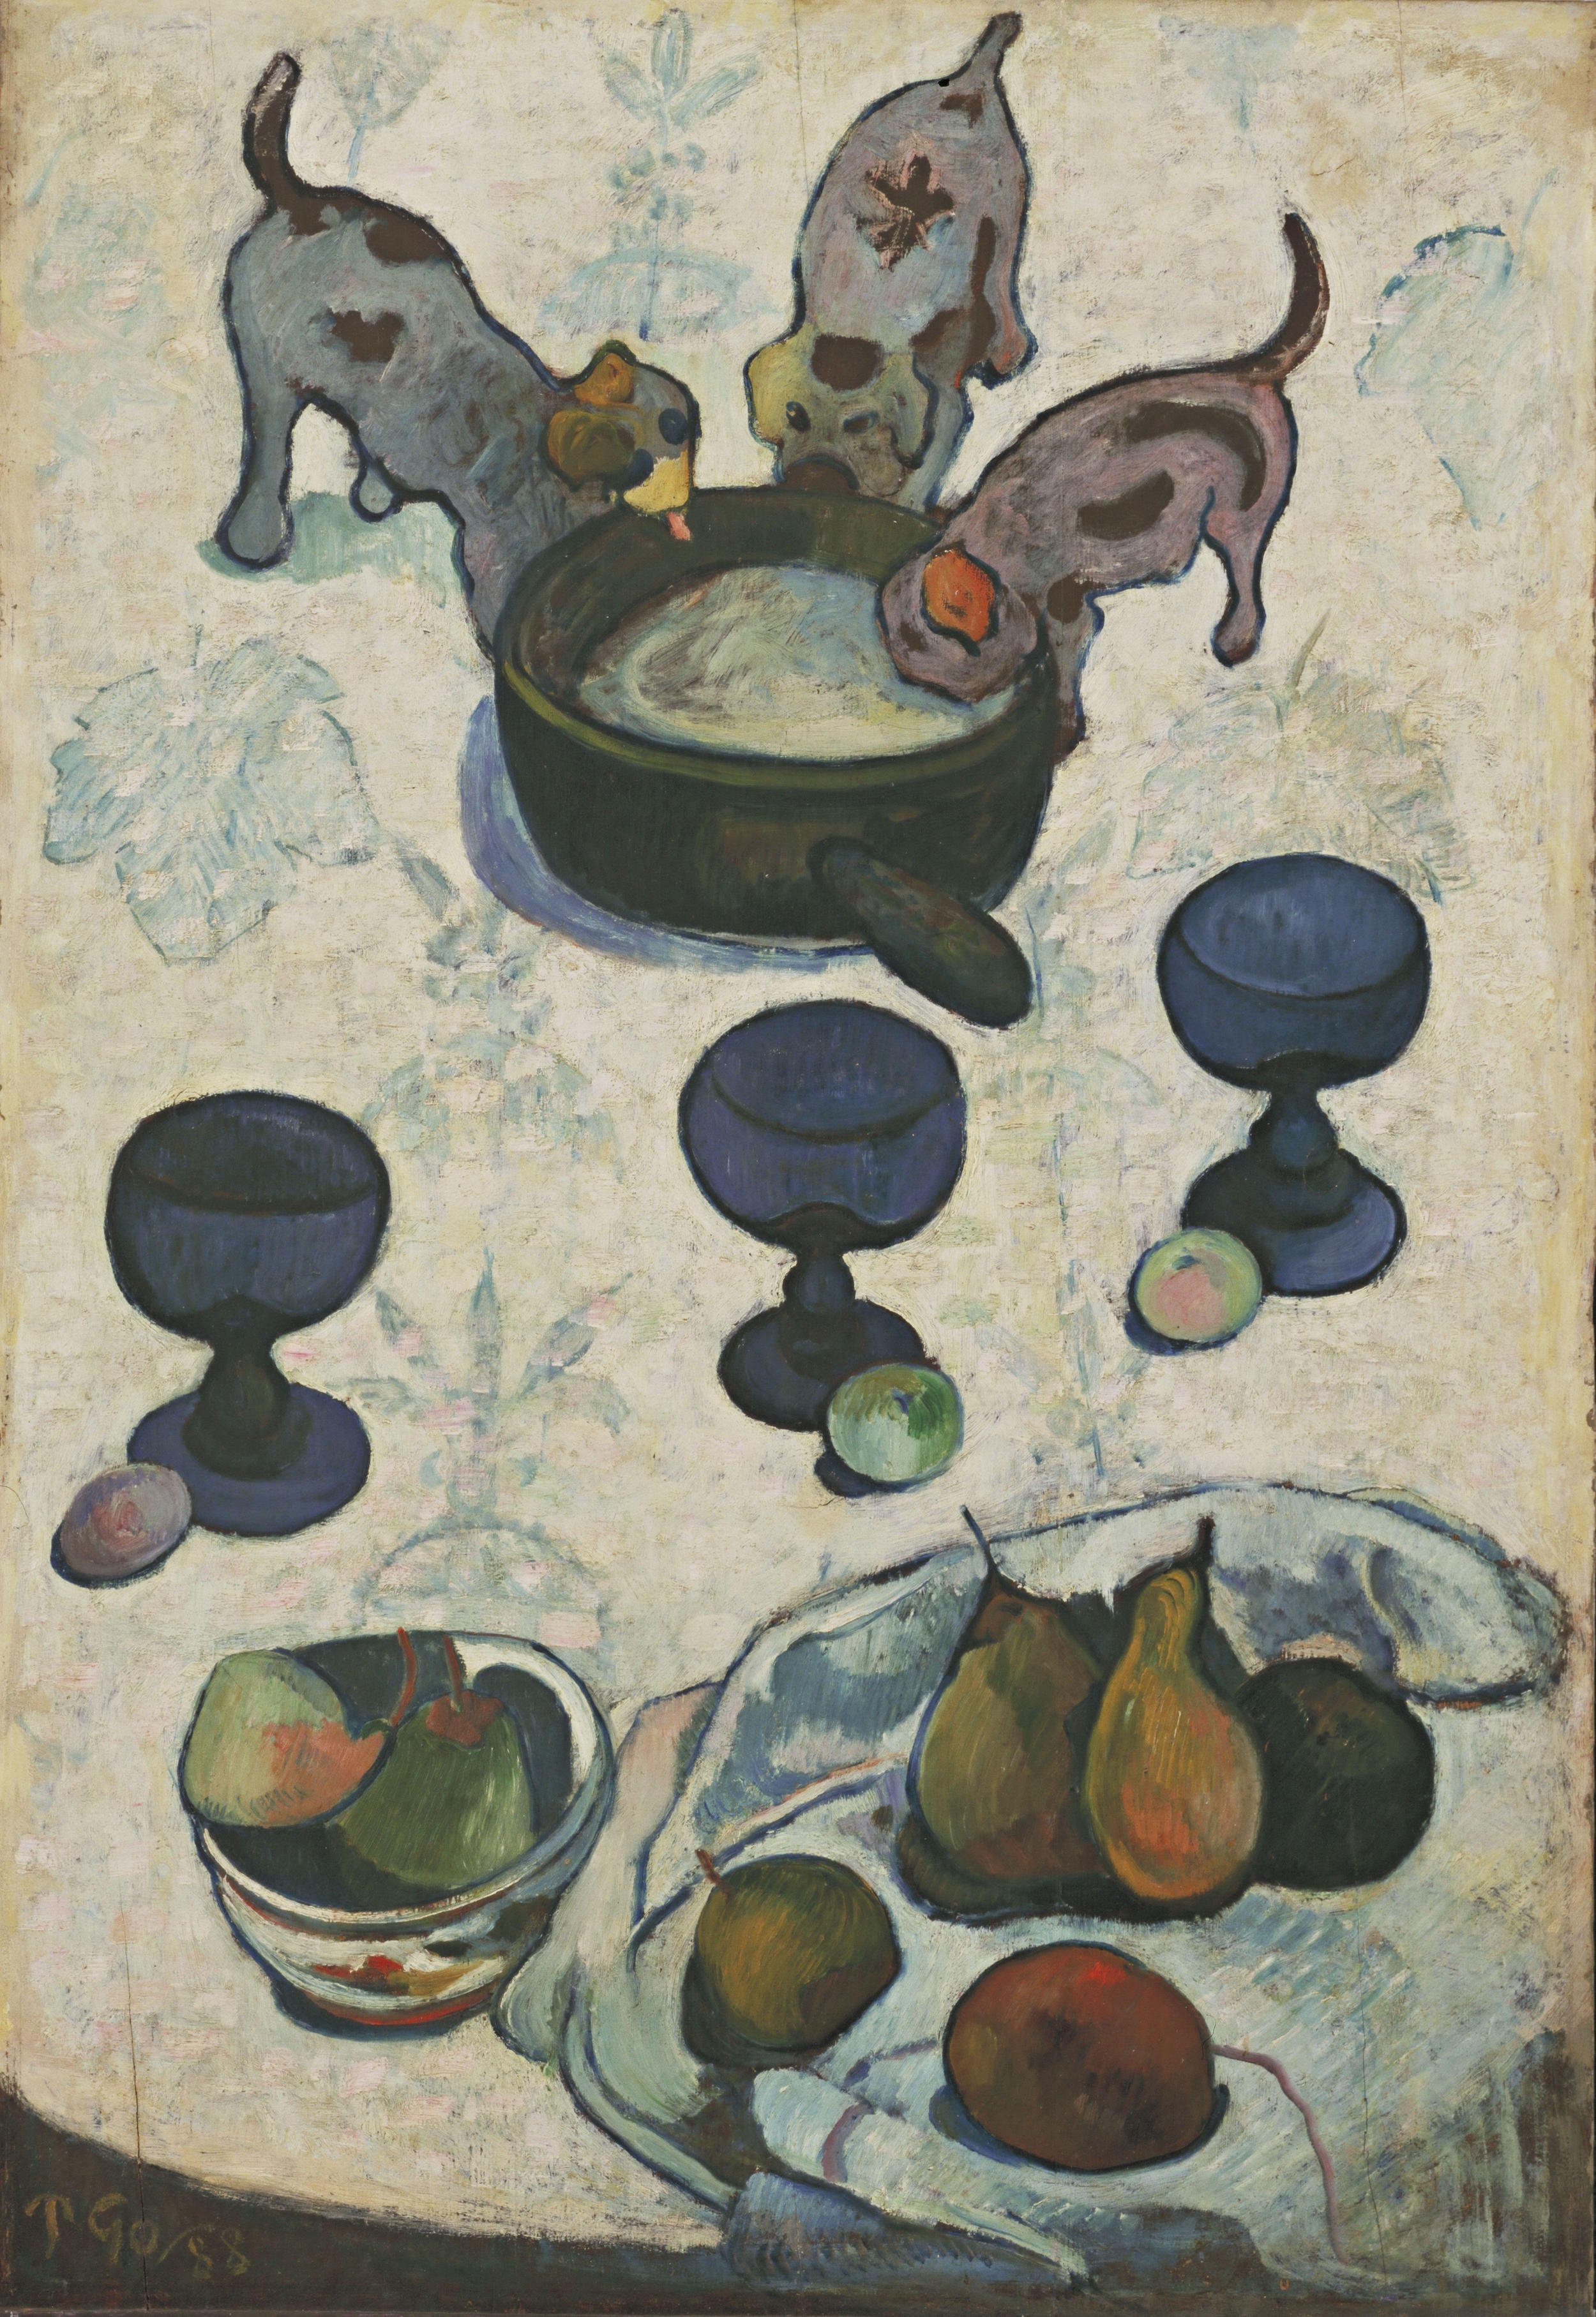 Still Life with Three Puppies by Paul Gauguin - 1888 - 92 cm x 63 cm Museum of Modern Art